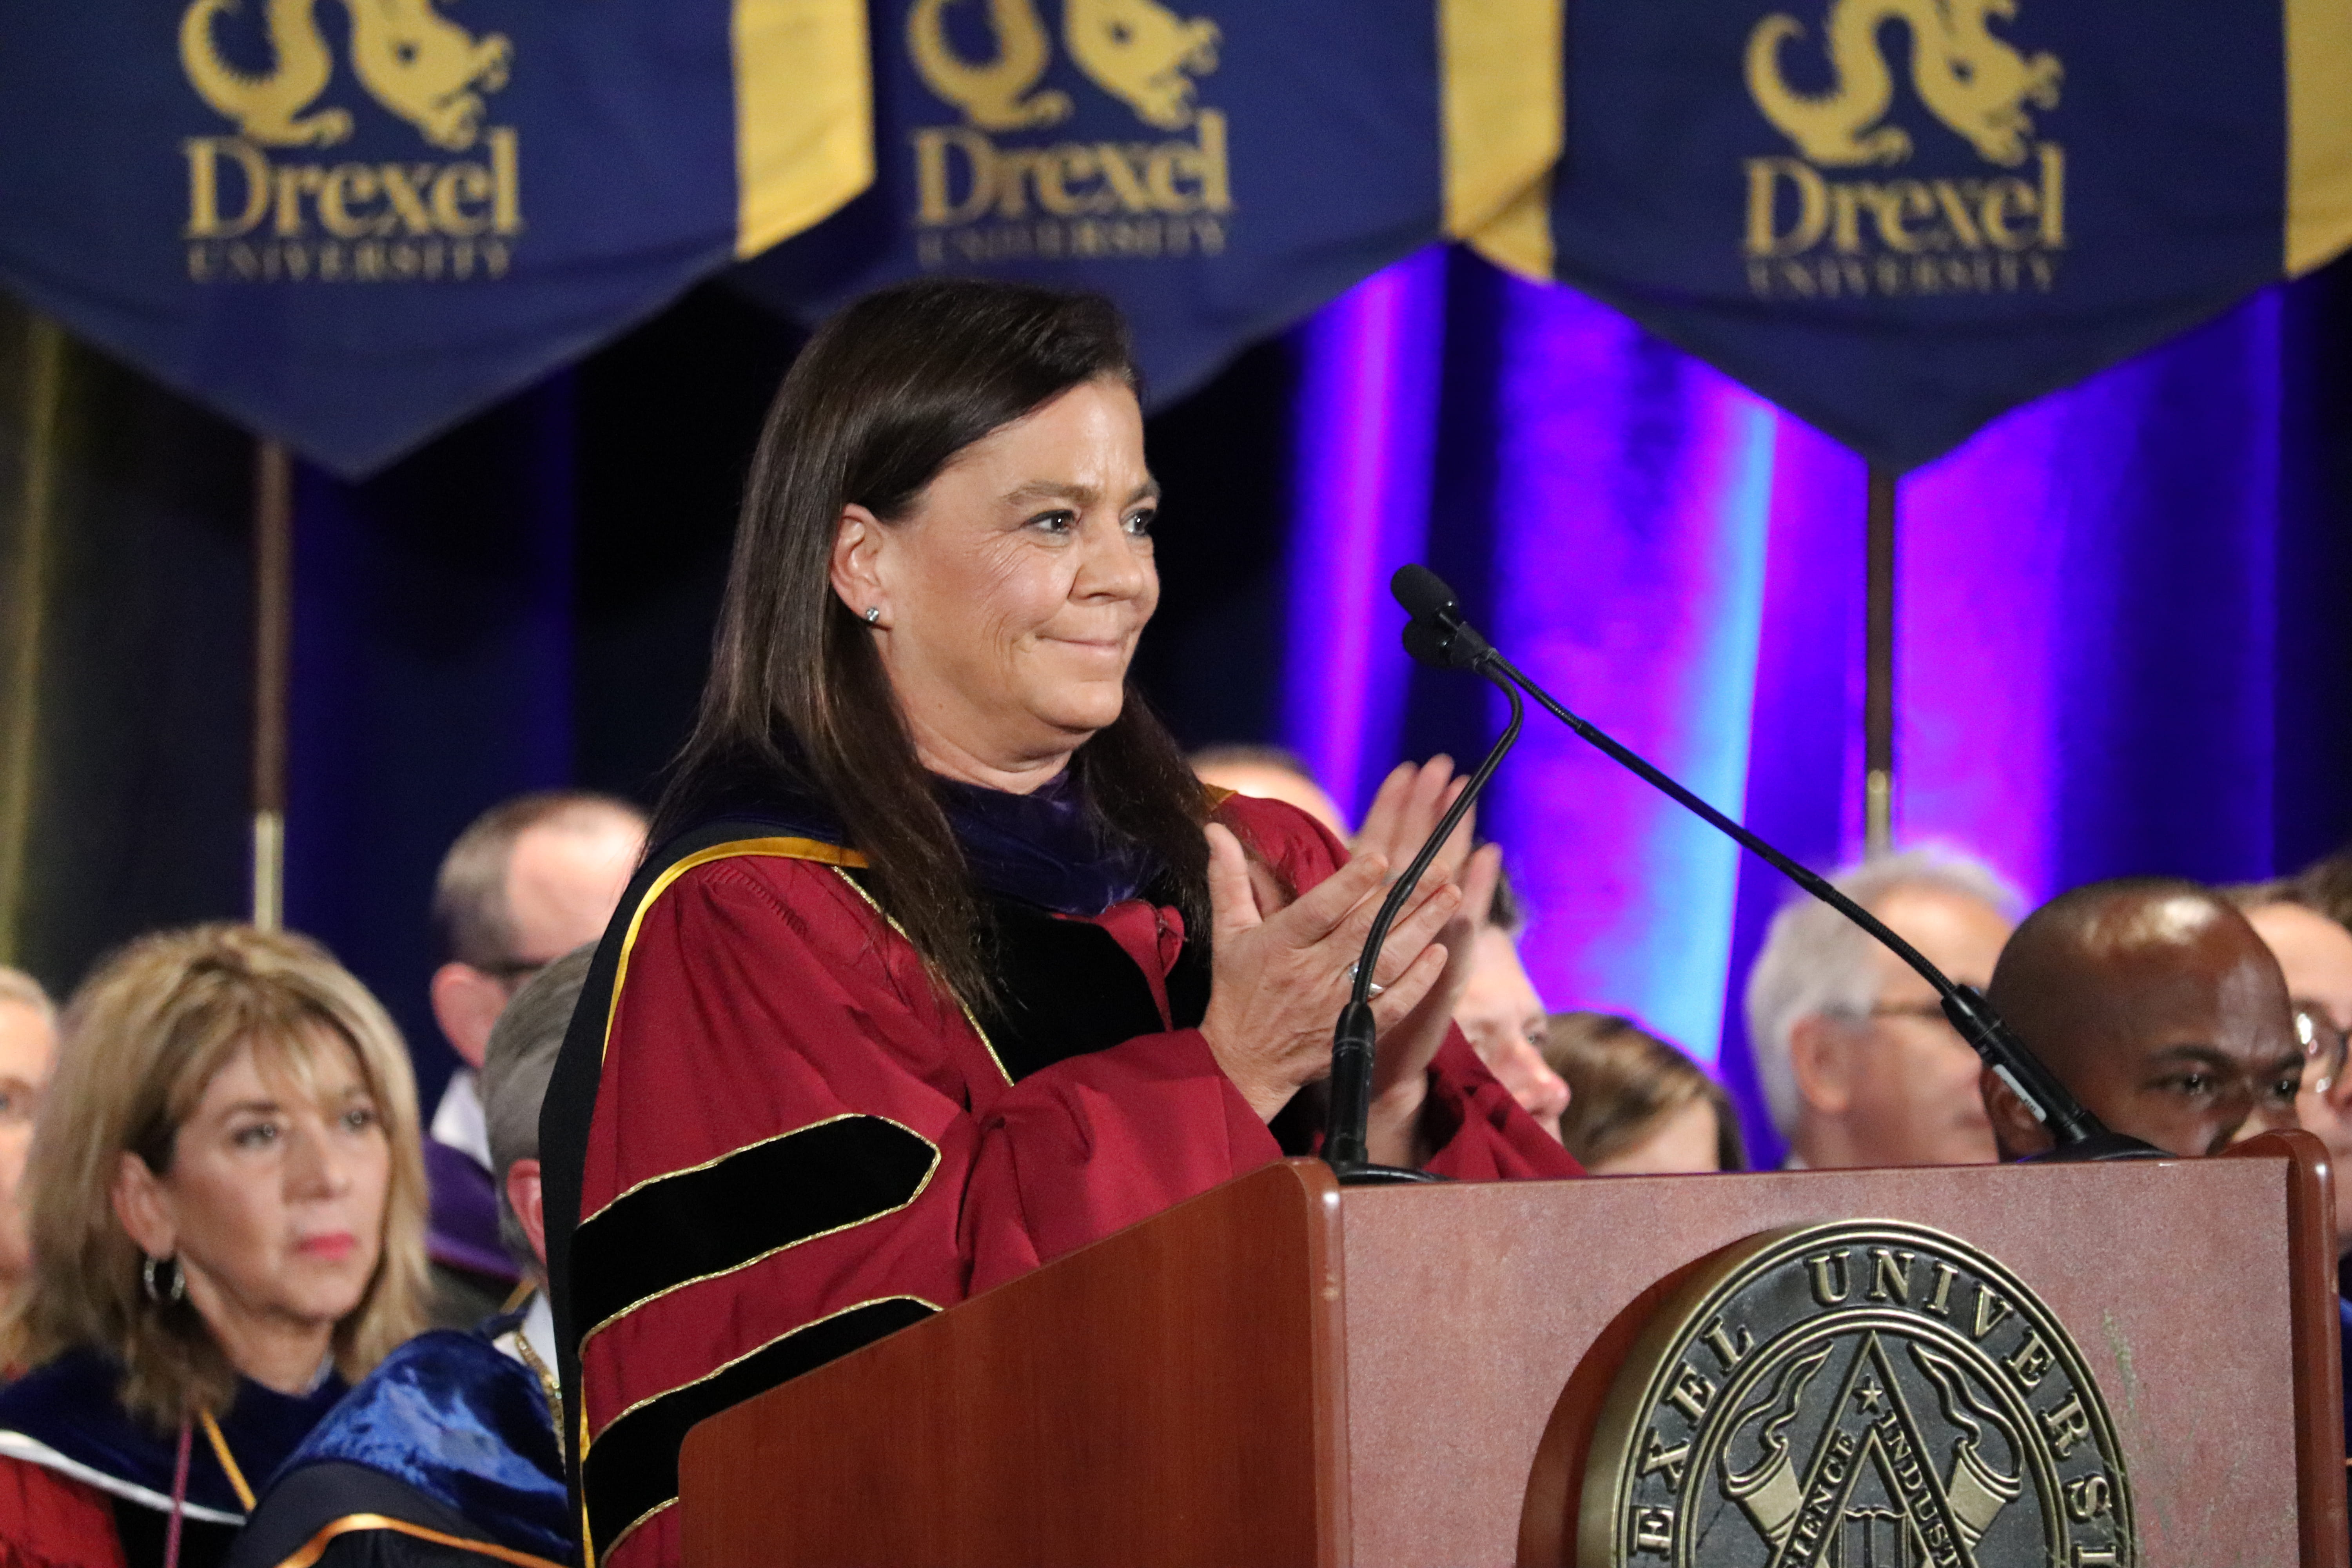 A woman clapping at a podium in Commencement gear.